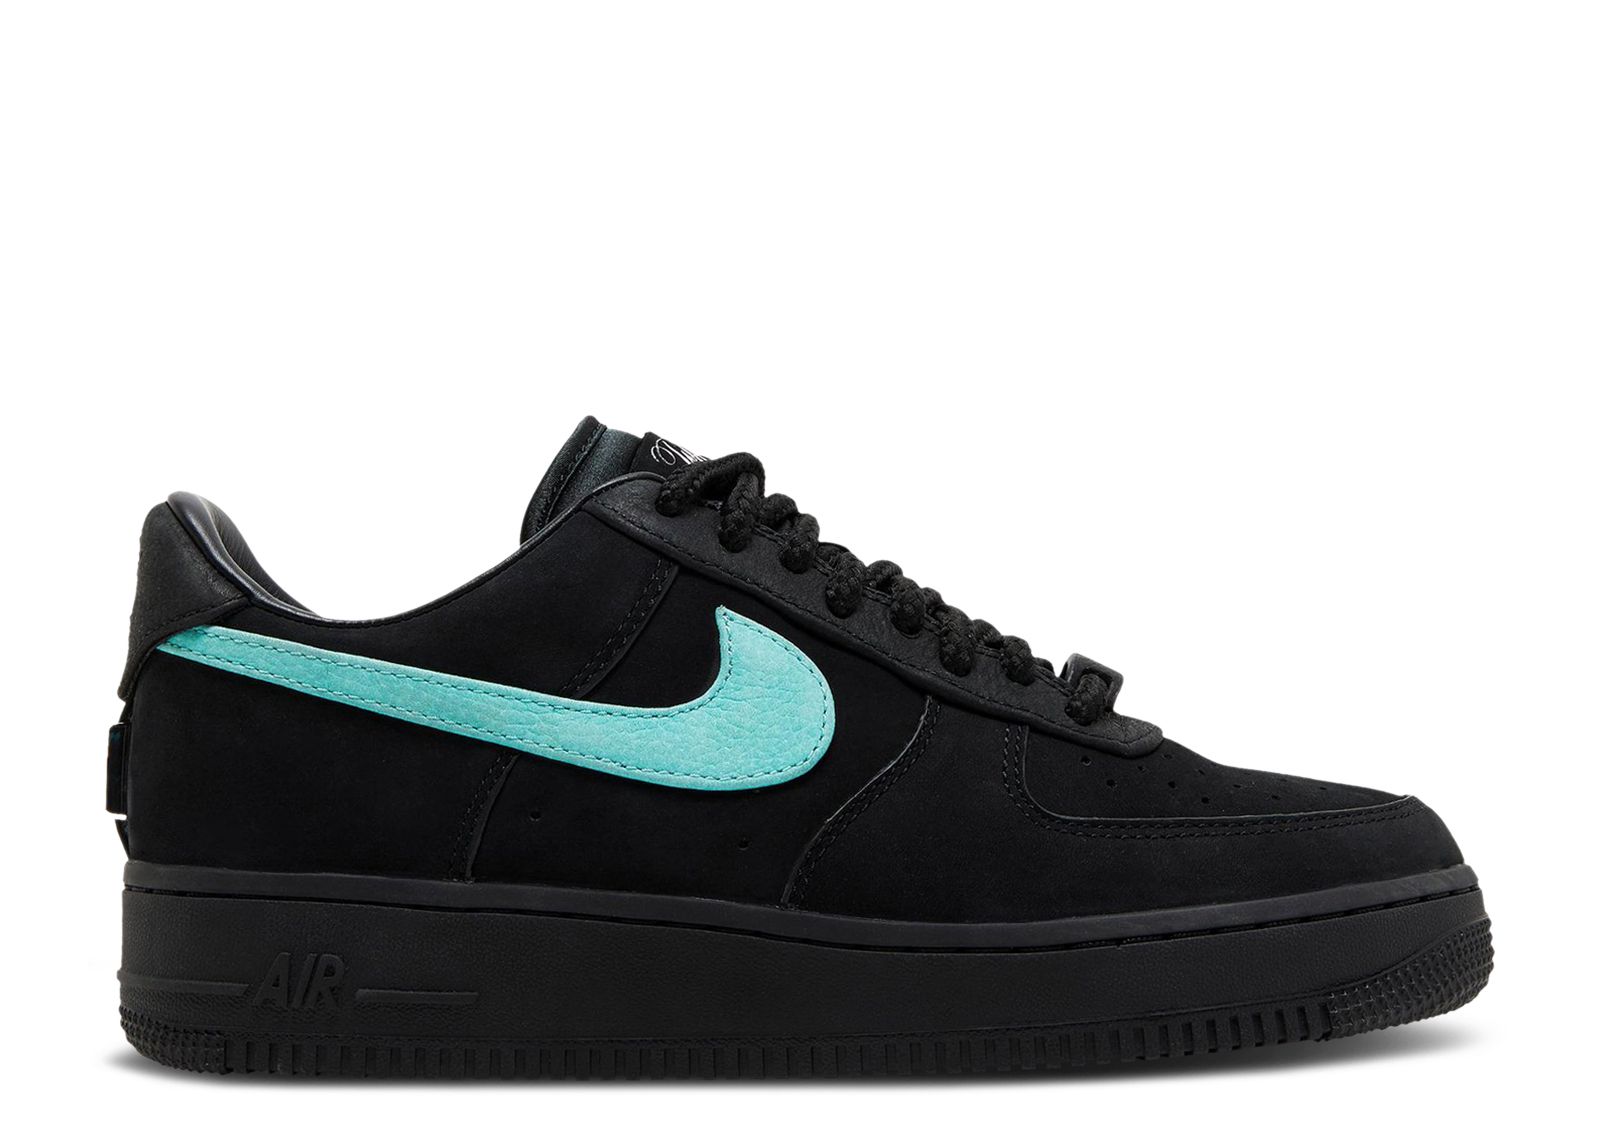 Кроссовки Nike Tiffany & Co. X Air Force 1 Low '1837' Special Box, черный original authentic nike air force 1 low mini swoosh men s skateboarding shoes sport outdoor sneakers 2018 new arrival 823511 603